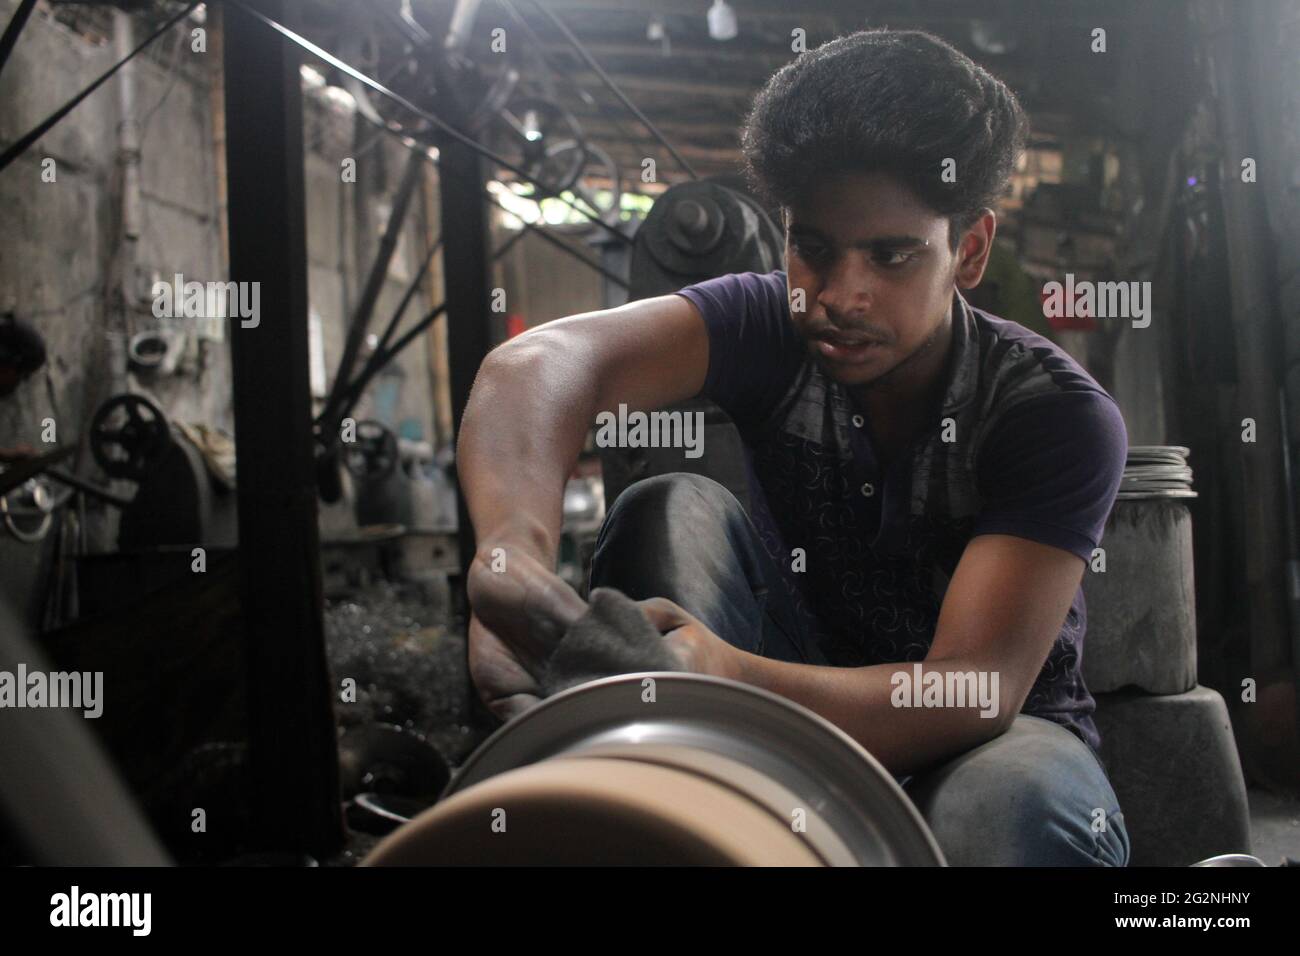 June 12 21 Dhaka Dhaka Bangladesh A Child Labor Works In A Silver Cooking Pot Manufacturing Factory In Dhaka Bangladesh On June 12 21 In This Type Of Aluminum Factories Around 30 50 Employ